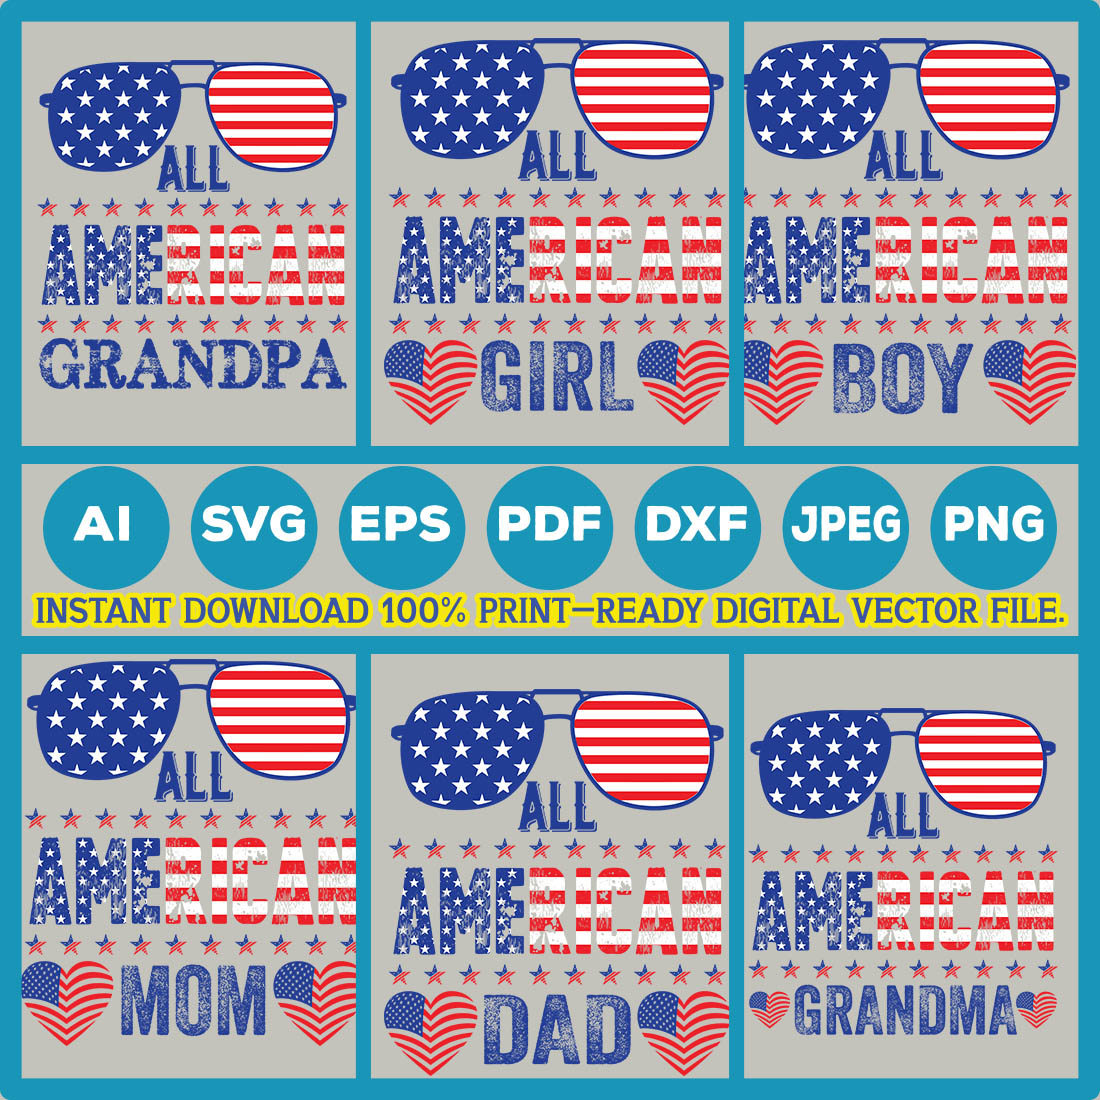 4th July All American Sublimation the Heart of the Family Quotes Bundle Vintage Typography Retro Svg Bundle T-Shirt Design Happy M4th July All American Sublimation Love is the Heart of the Family, It's All About Happy Mother Day Vintage Typography Retro Tshirt Design | Ai, Svg, Eps, Dxf, PDF, Jpeg, Png, Instant download Digital File T-Shirt Design | 100% print-ready Digital vector file preview image.